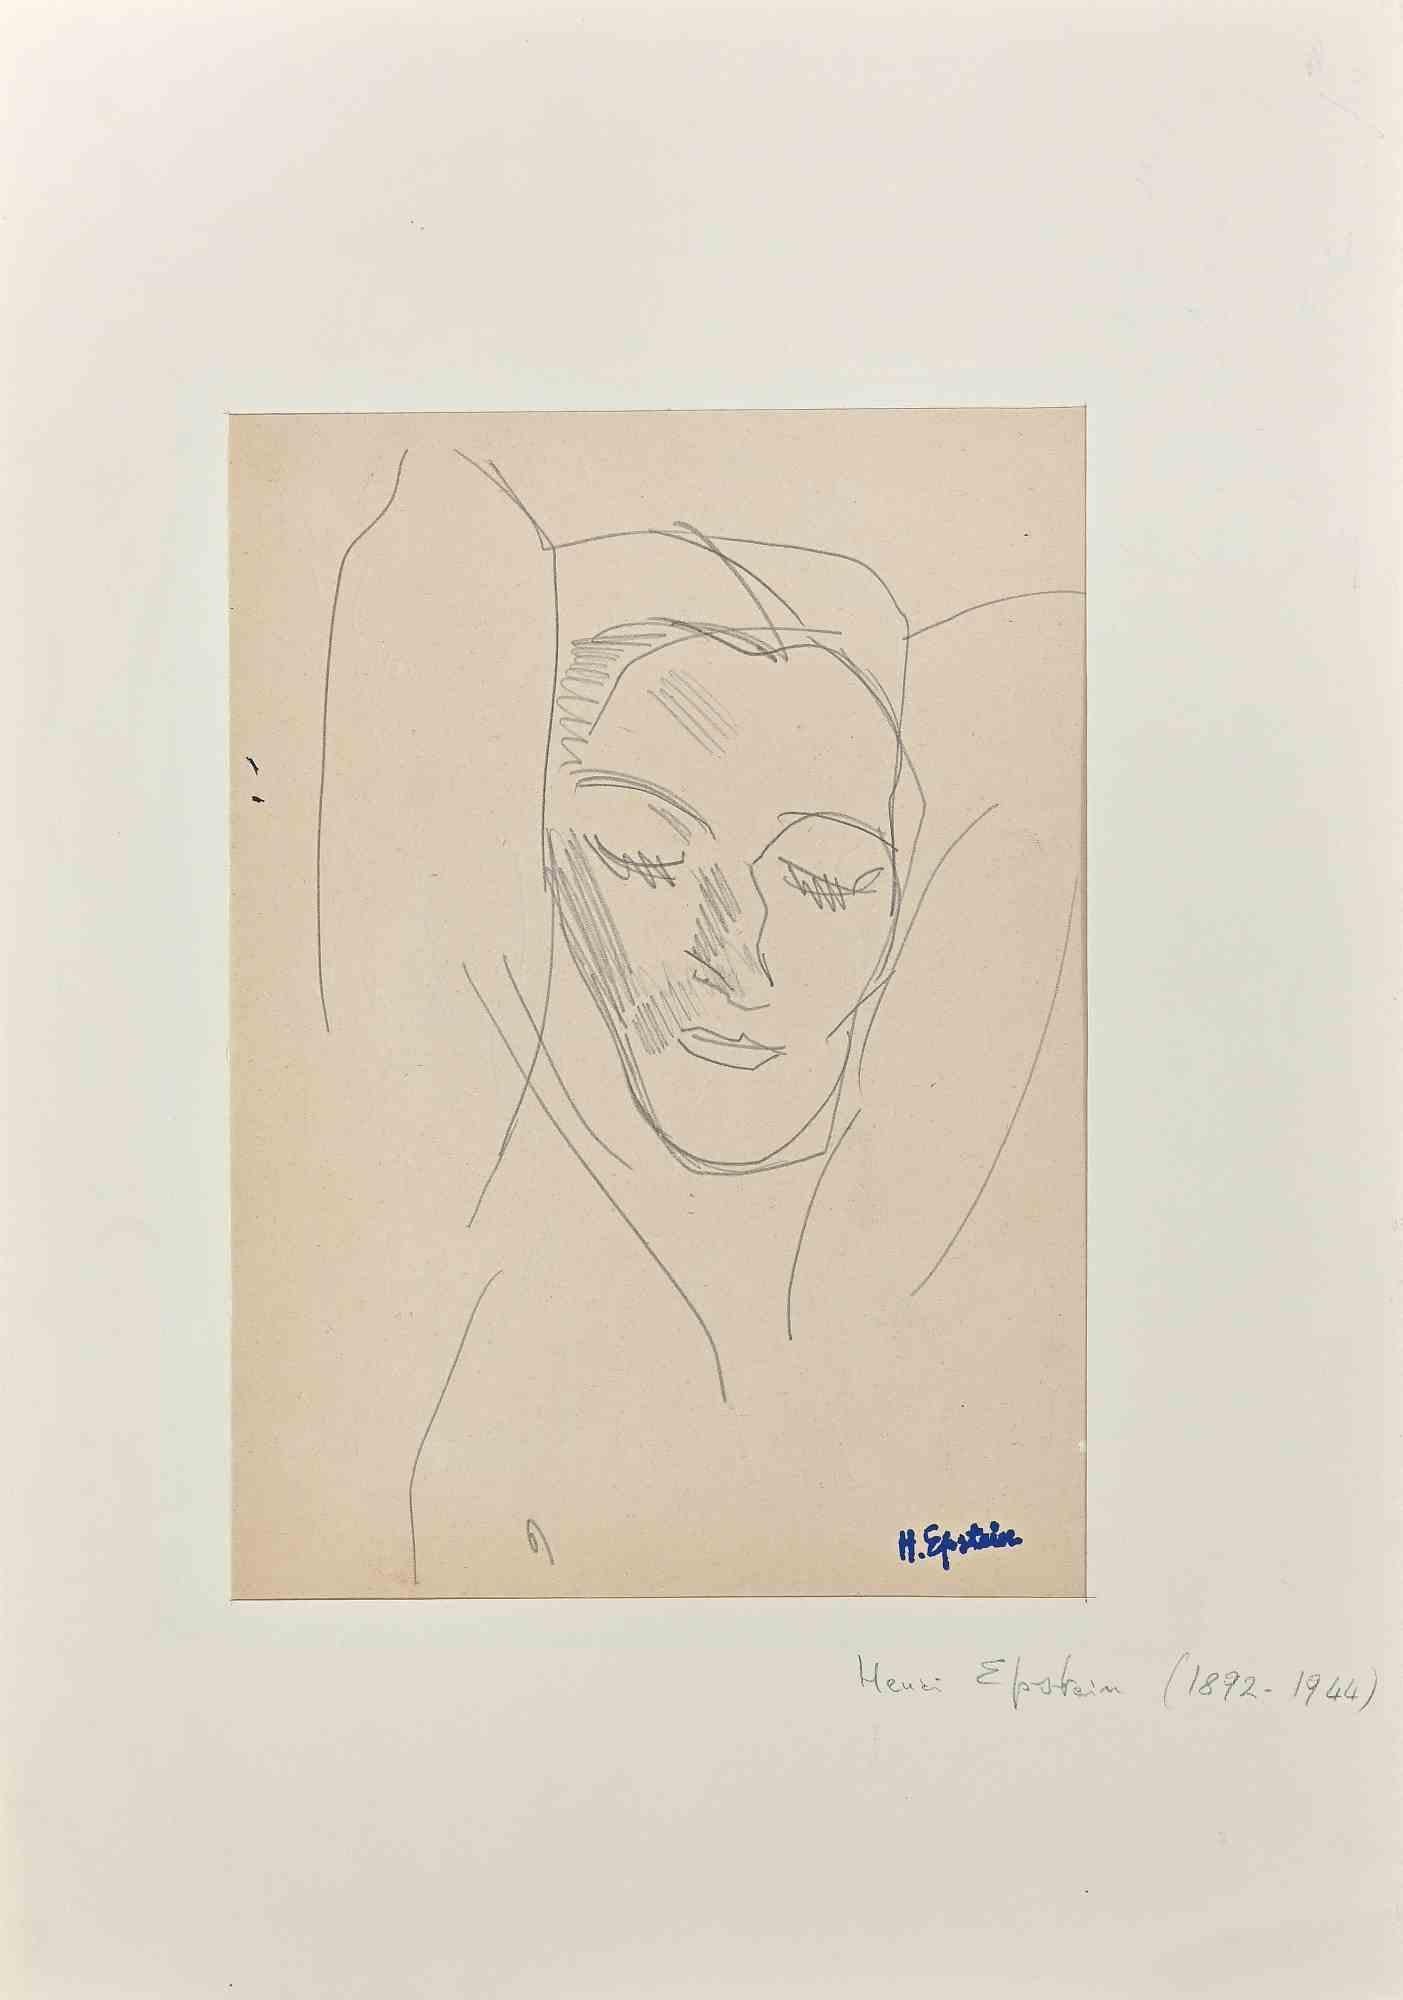 Female Face is an Pencil Drawing realized by Henri Epstein (1892-1944).

Good condition on a yellowed paper, included a white cardboard (50x35 cm).

Hand-signed by the artist on the lower right corner.

Henri Epstein born in Lódz ( Russian Empire )